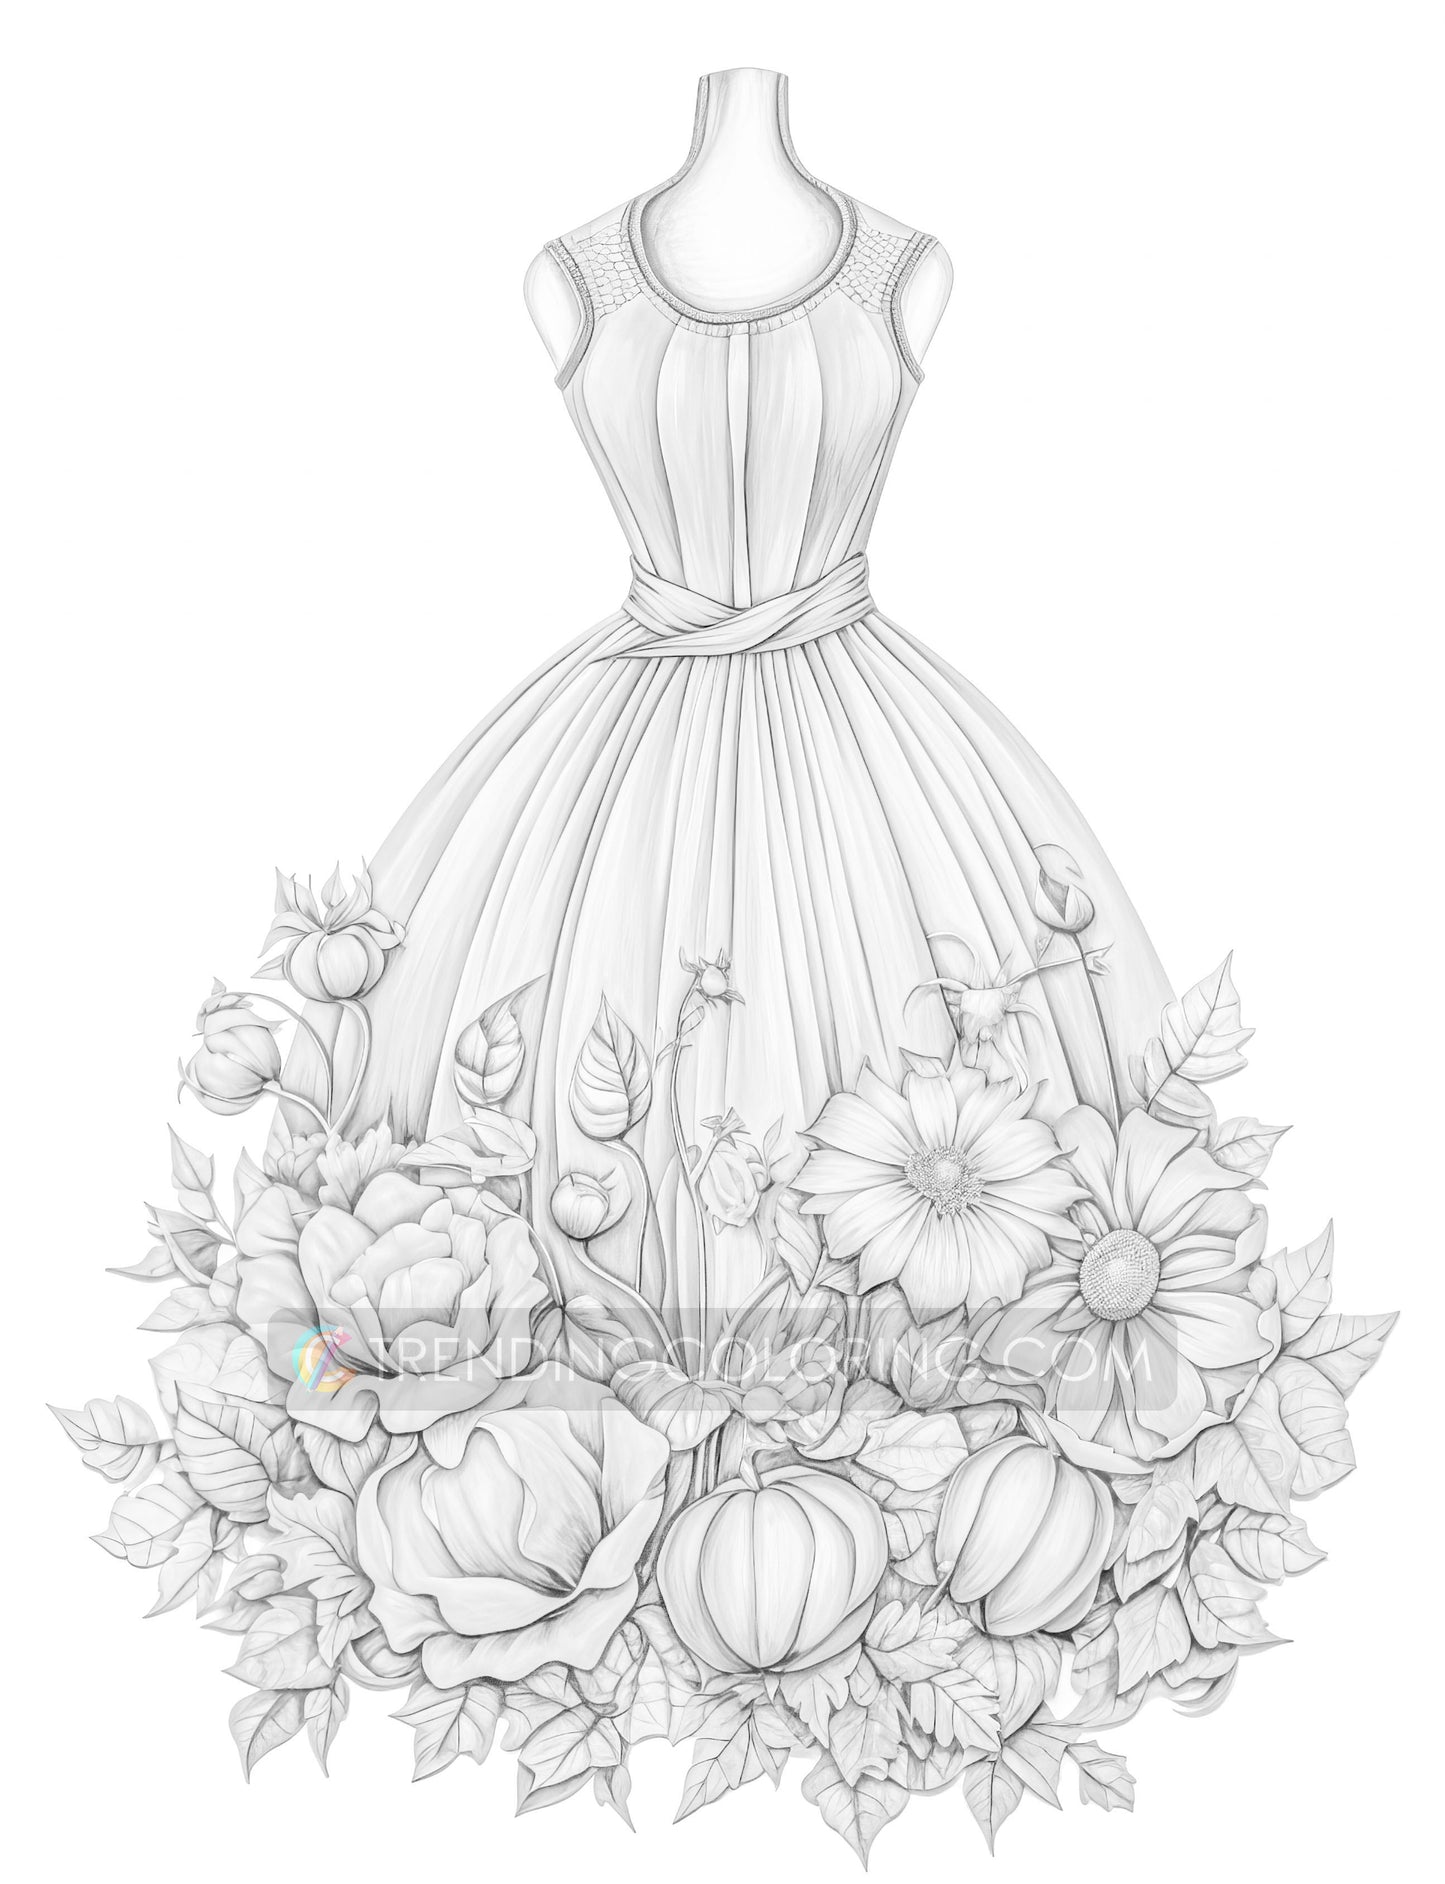 50 Autumn Dress Grayscale Coloring Pages - Instant Download - Printable PDF Dark/Light